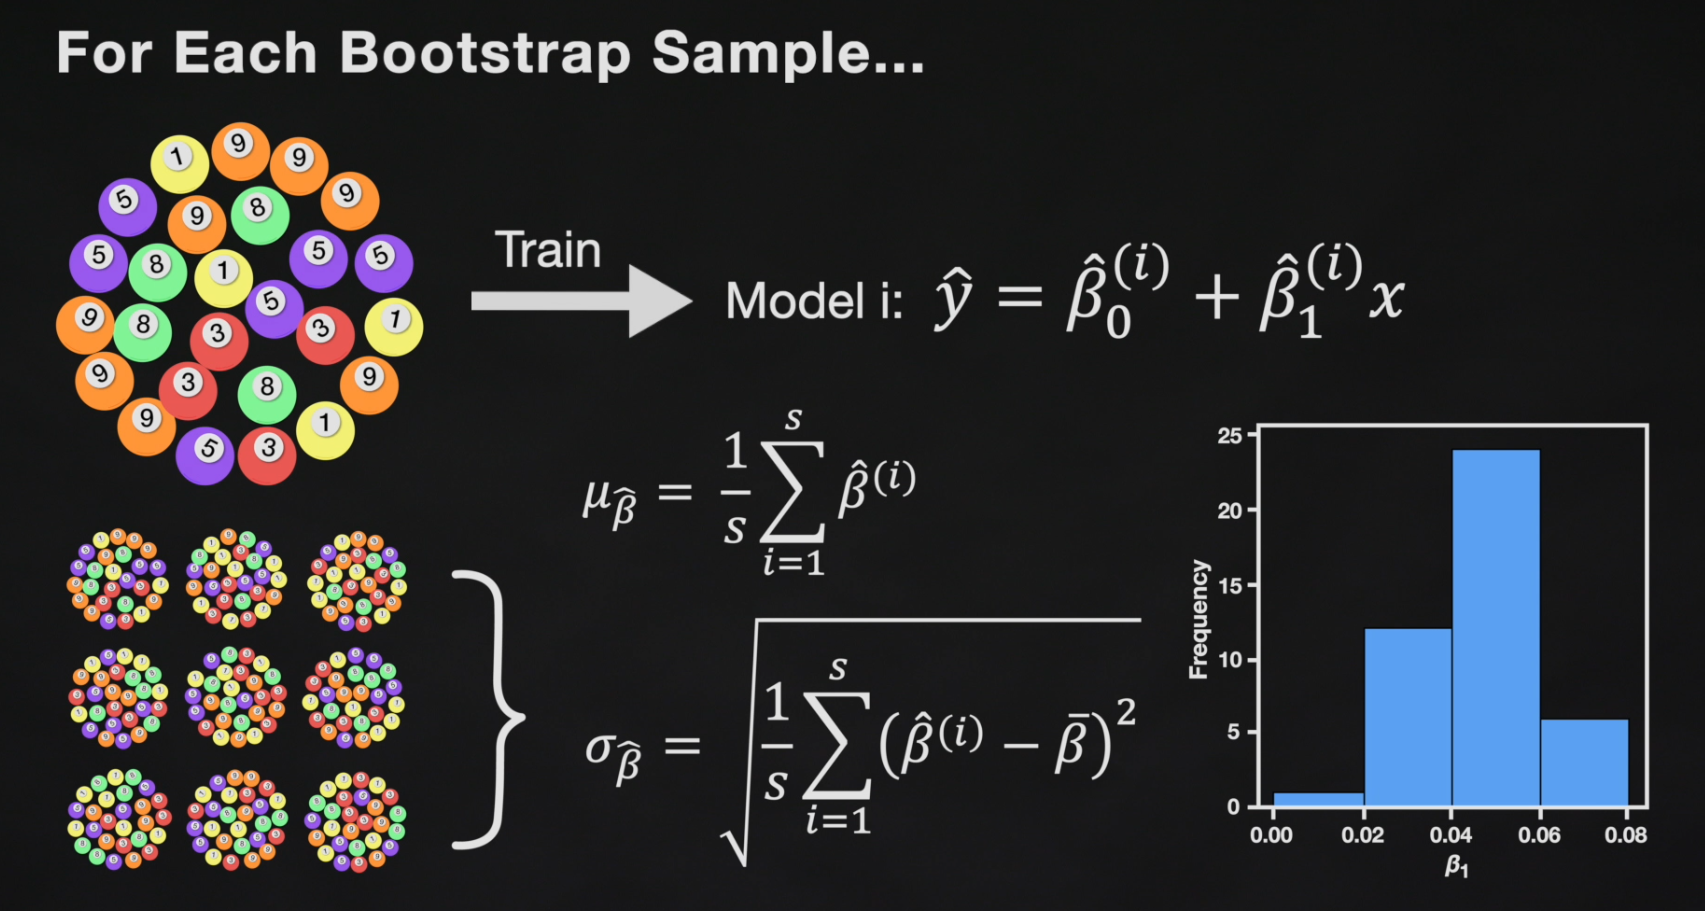 The process is repeated many times. The collection of bootstrap samples is used to provide calculate the standard deviation for the model's beta values.